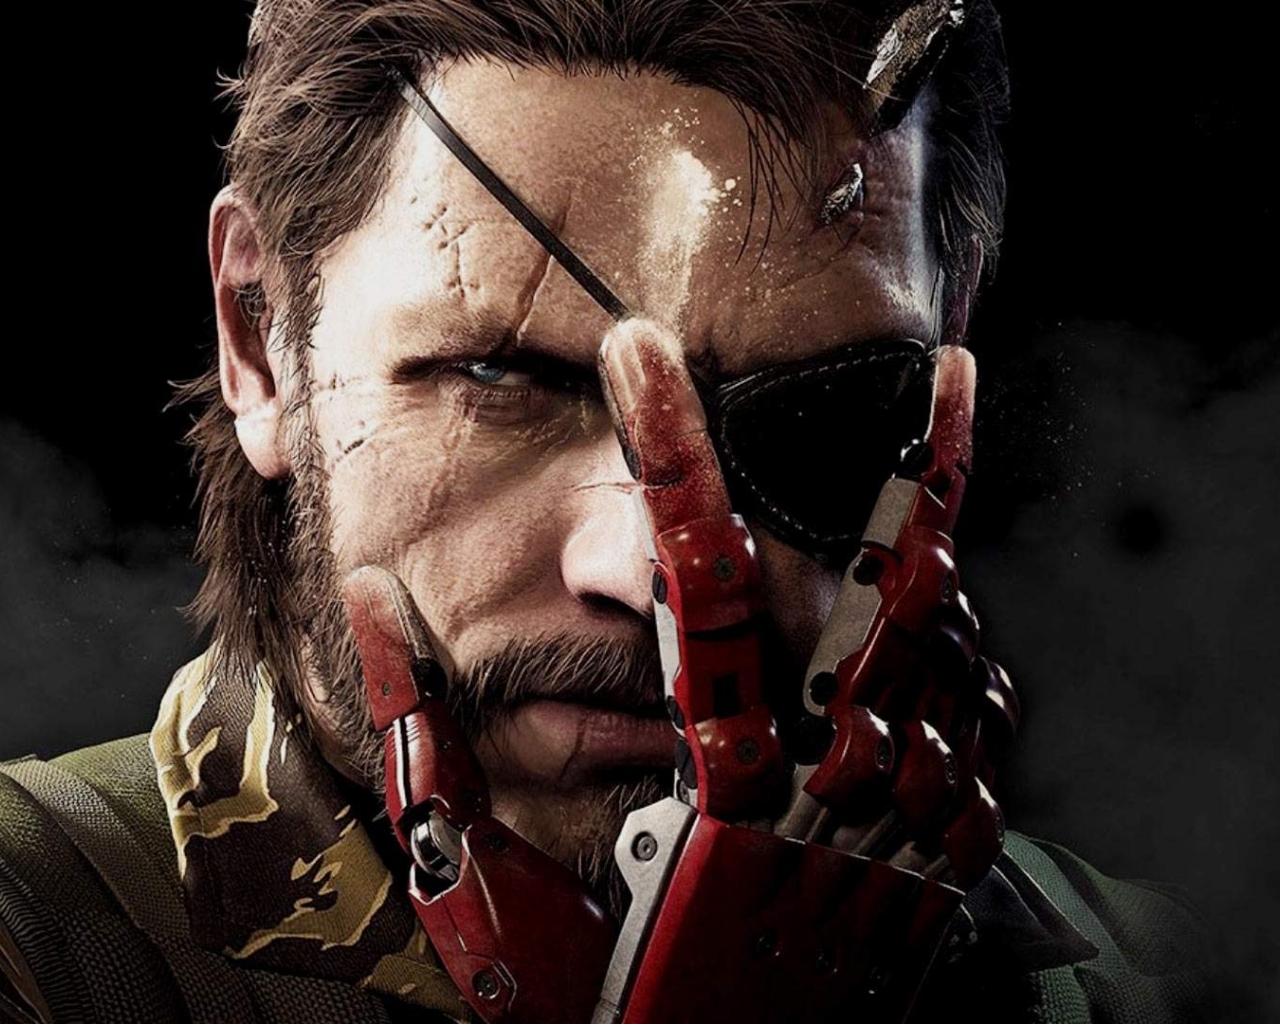 1280x1024 The Phantom Pain Metal Gear Solid V 1280x1024 Resolution Wallpaper Hd Games 4k Wallpapers Images Photos And Background Wallpapers Den